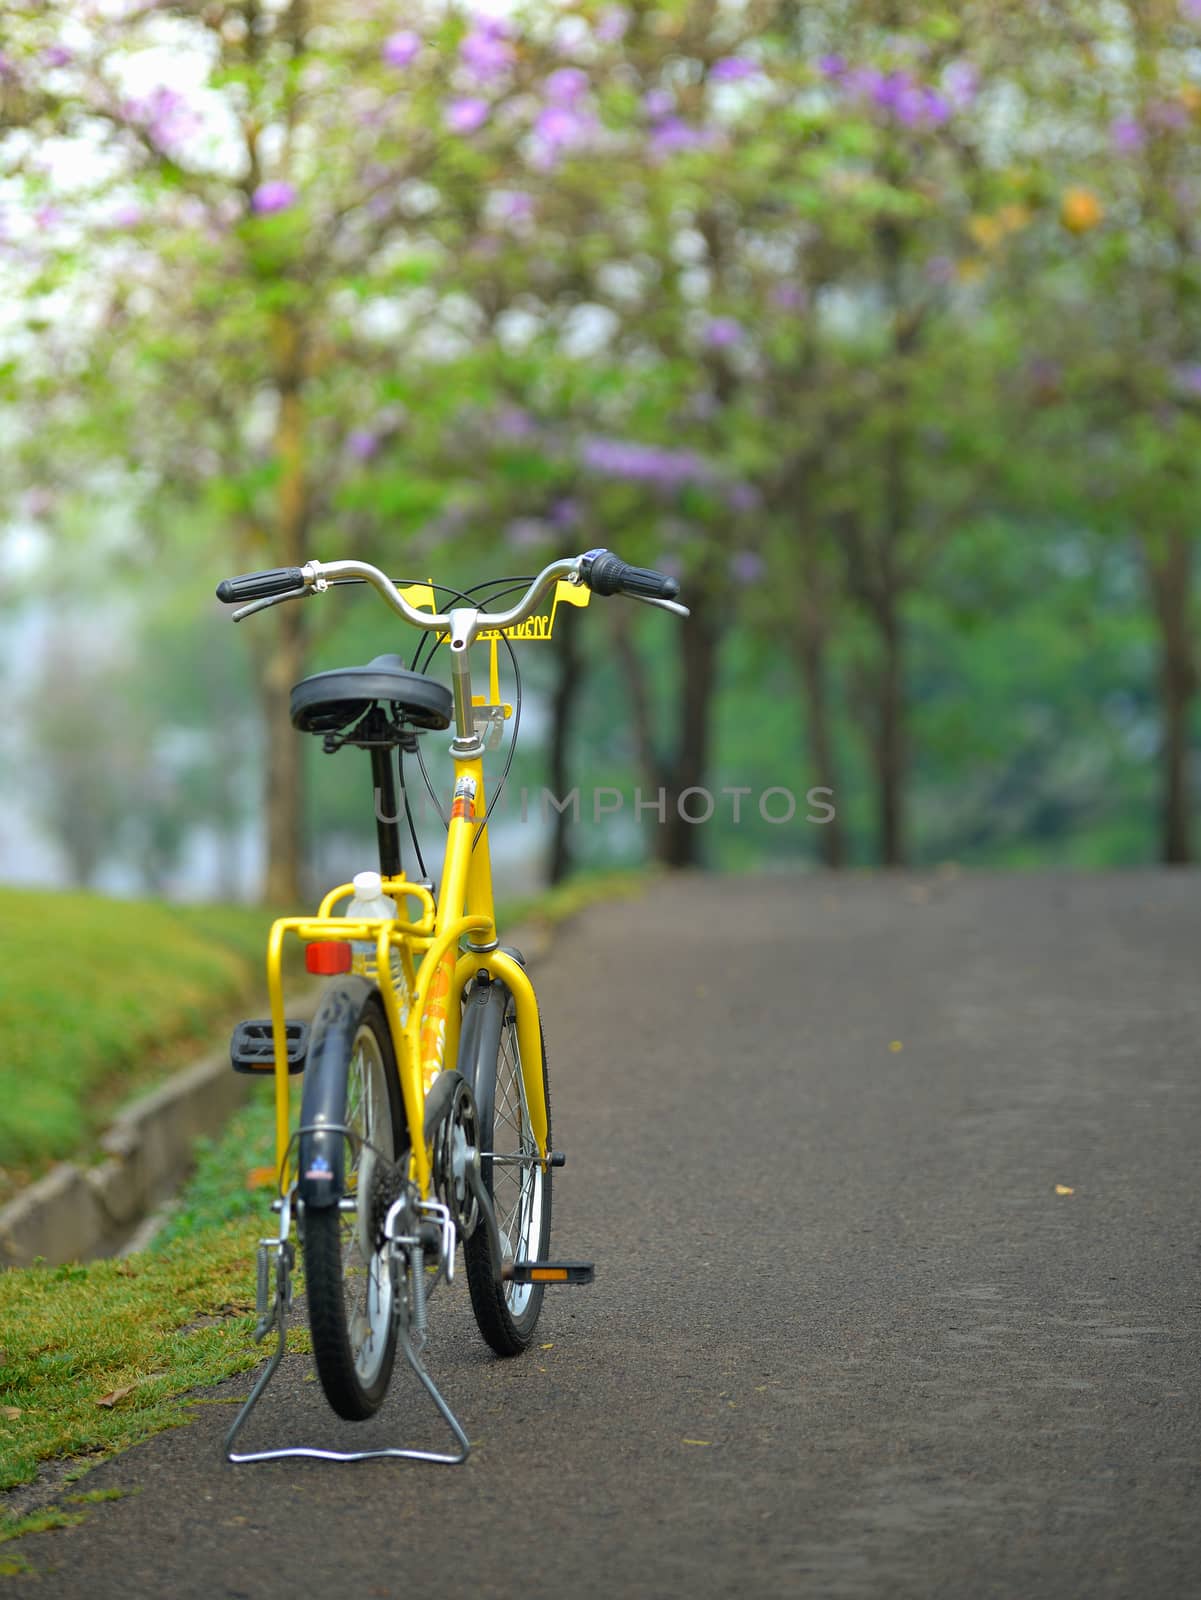  bicycle in the garden road 